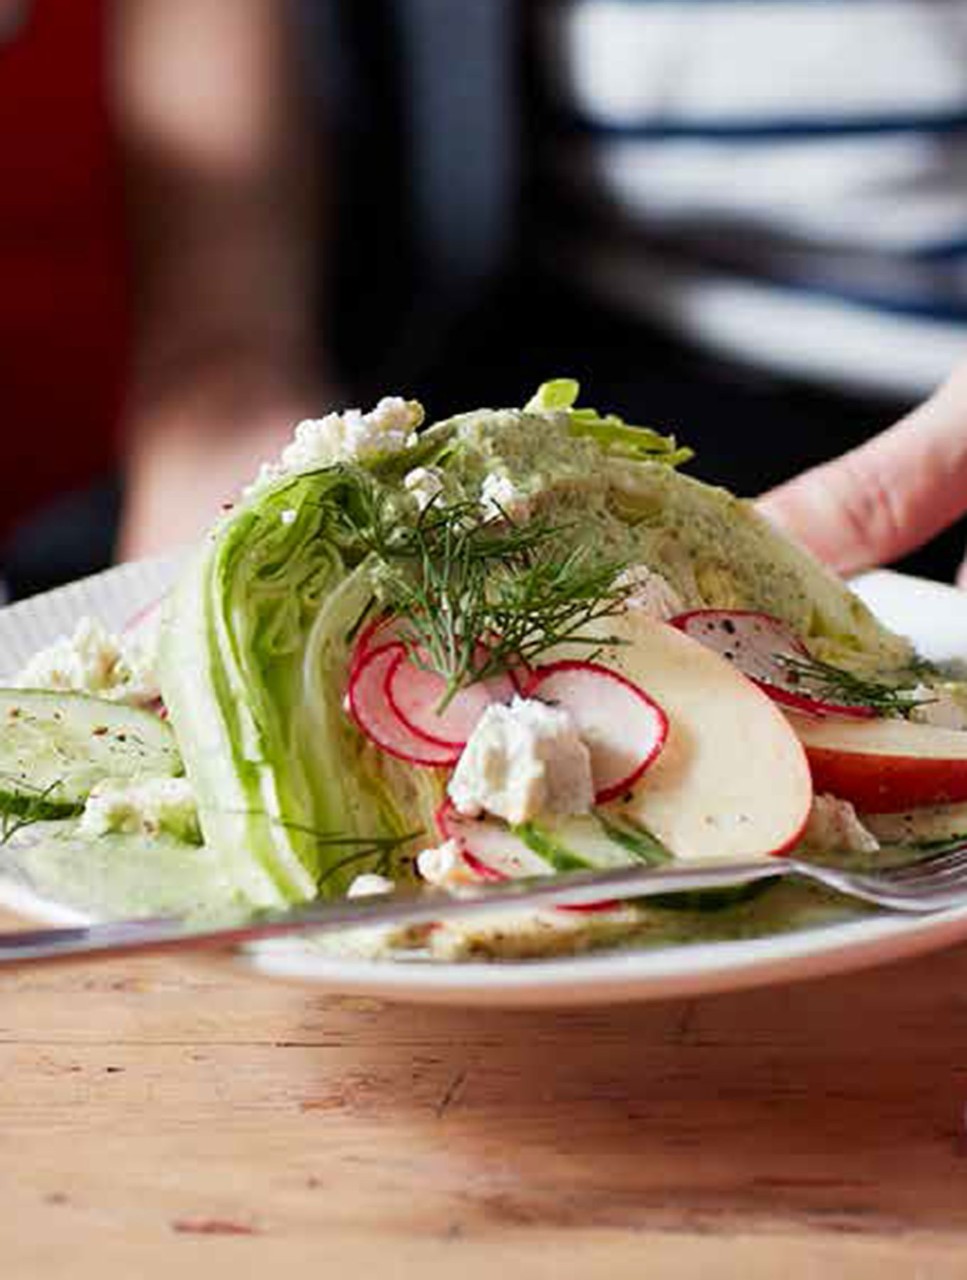 Cucumber & Apple Wedge Salad with Creamy Dill Dressing